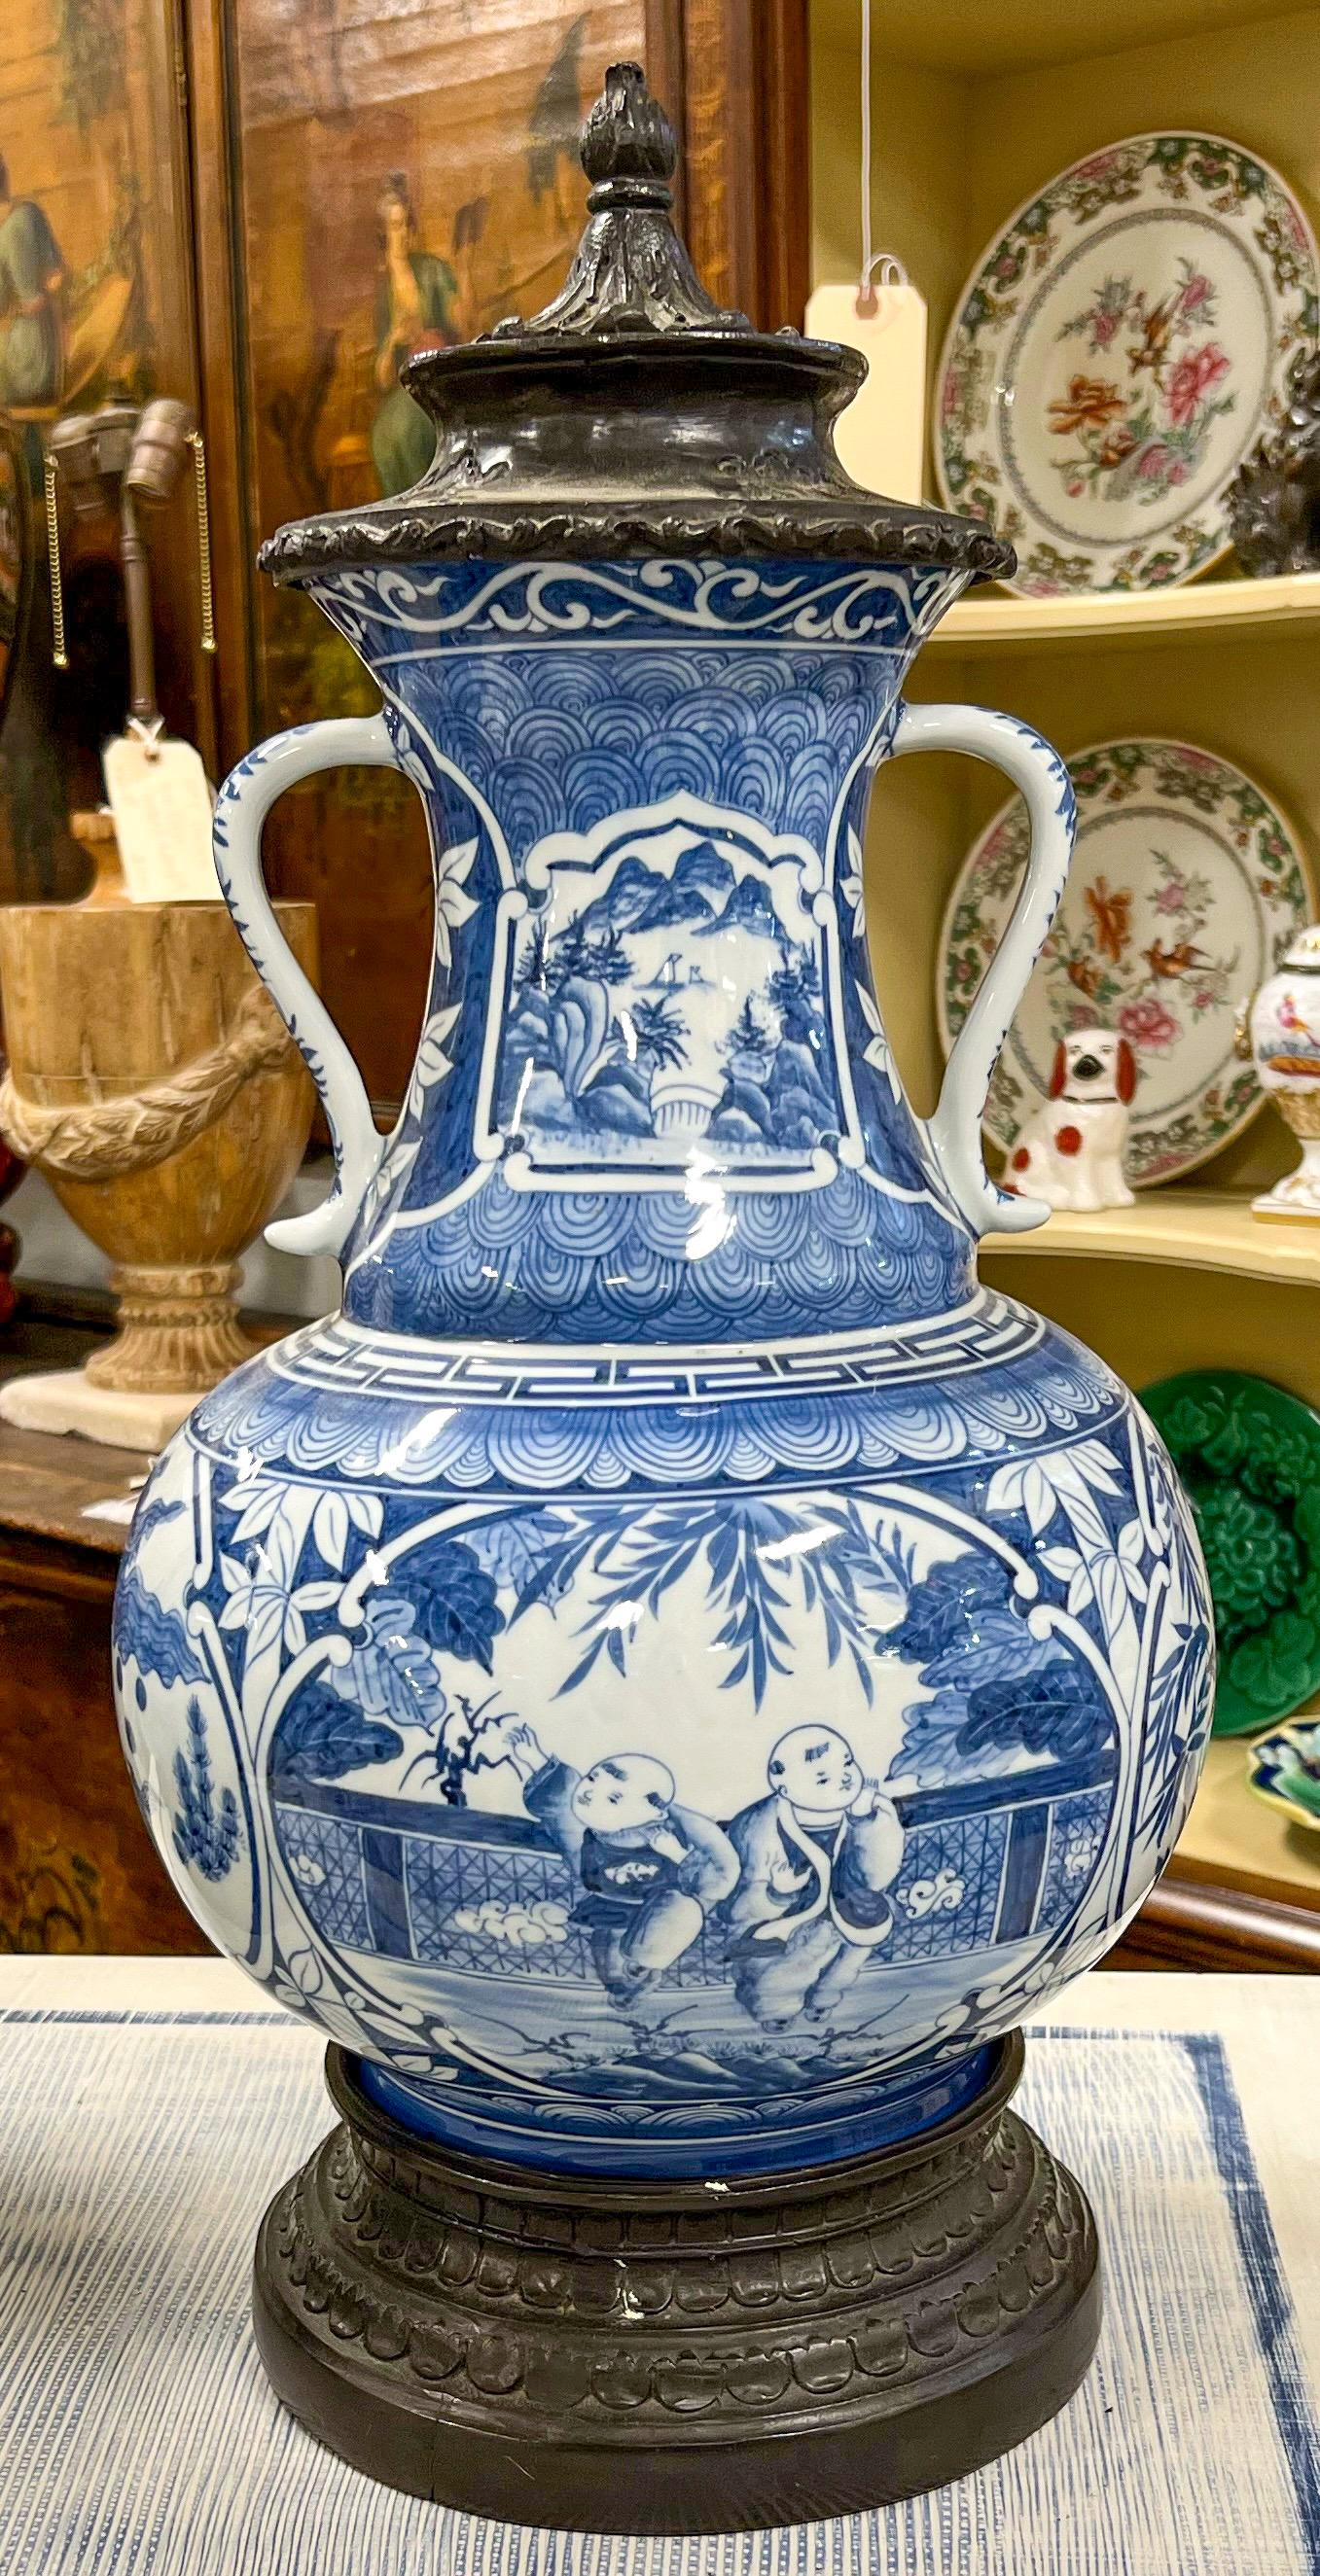 This is a pair of blue and white transferware chinoiserie ginger jars by Maitland - Smith. The caps and bases are cast bronze. They are in very good condition.